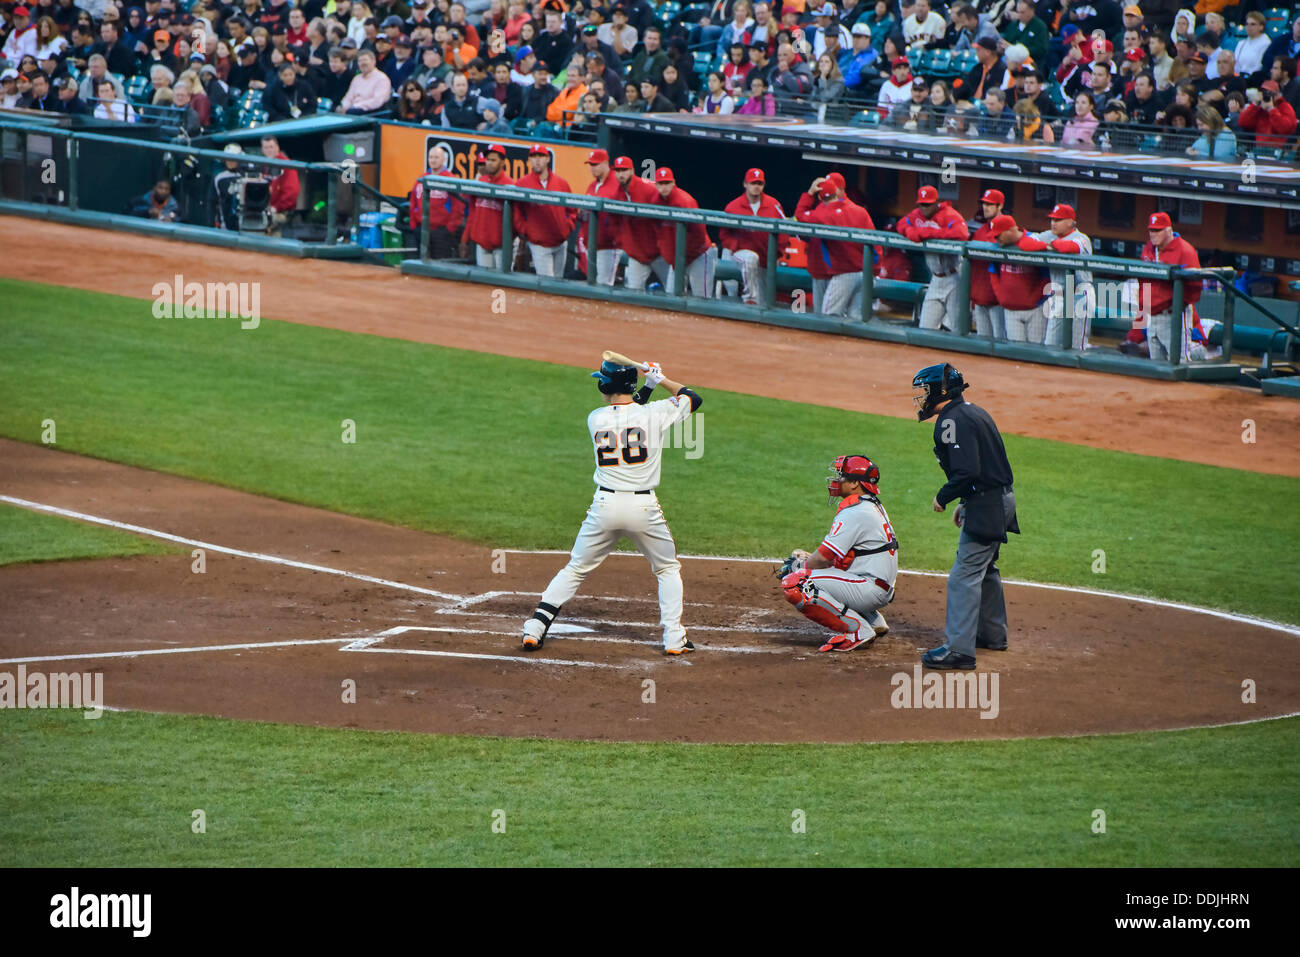 Buster Posey hitting for the San Francisco Giants at AT&T Park, San Francisco, California Stock Photo